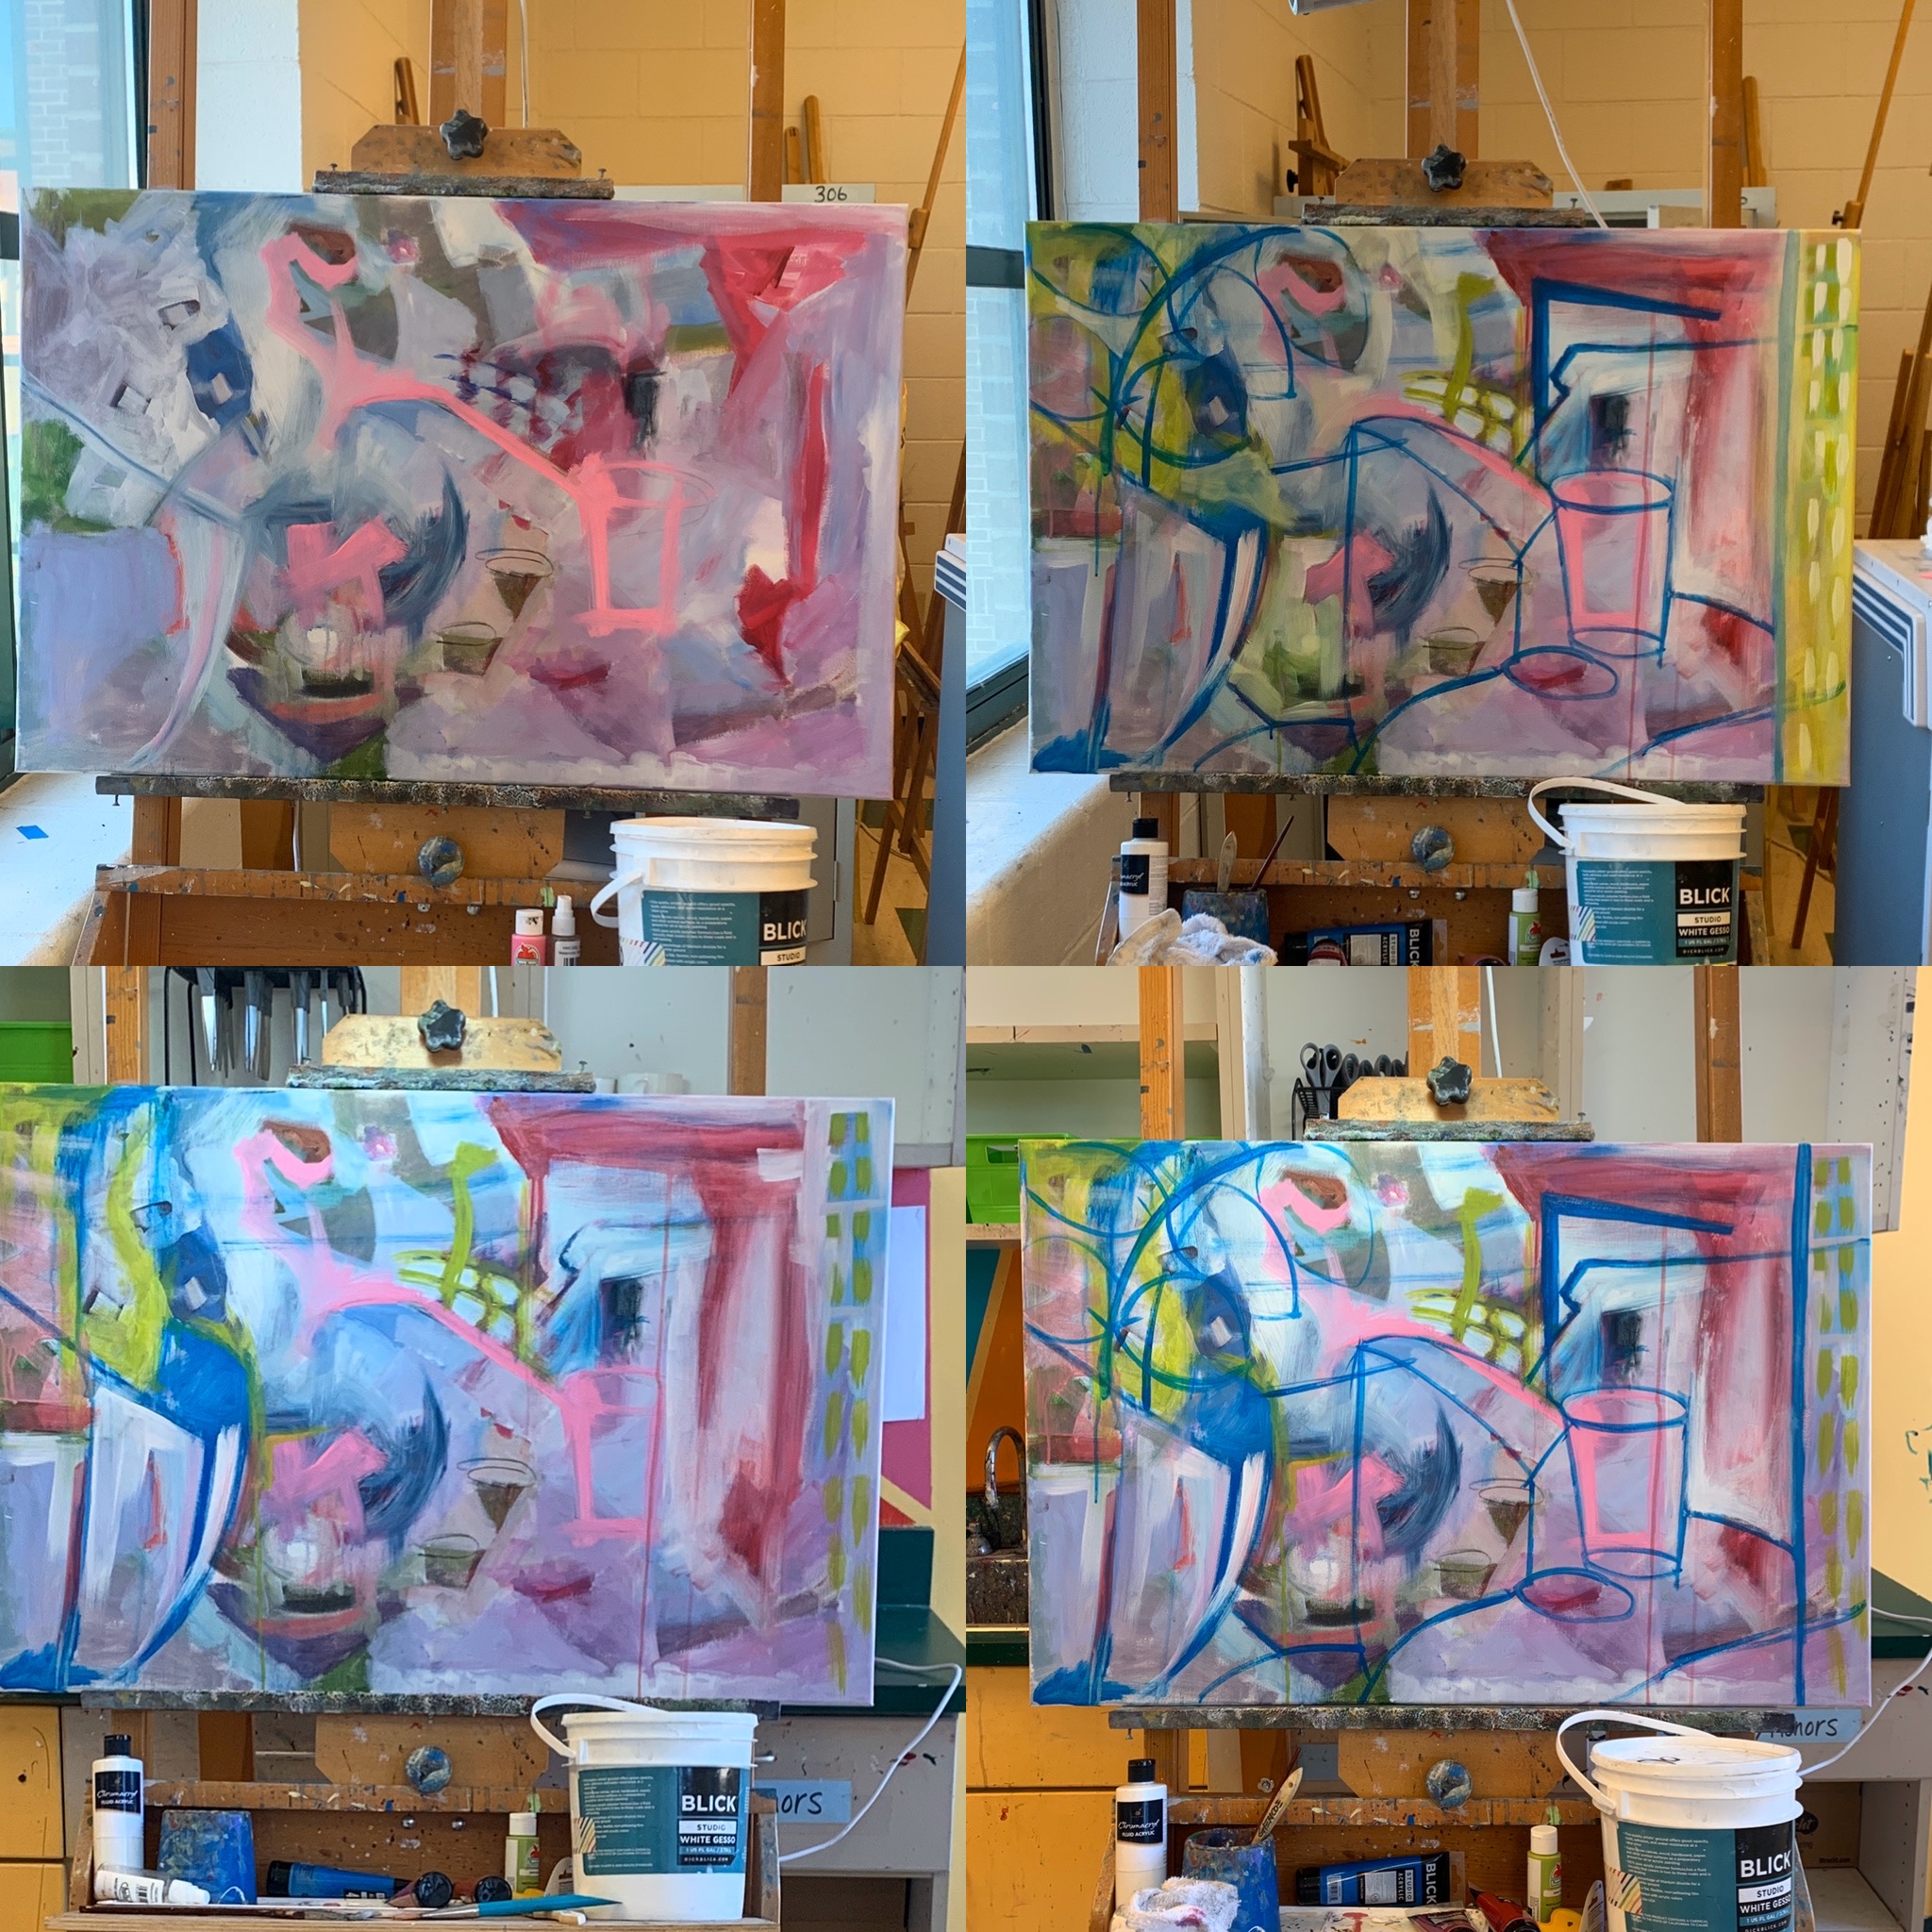 Work in Progress. The photo shows a painting in four different stages and how layering and wiping away techniques have been used. Acrylic paint on canvas by Elaine Algarra